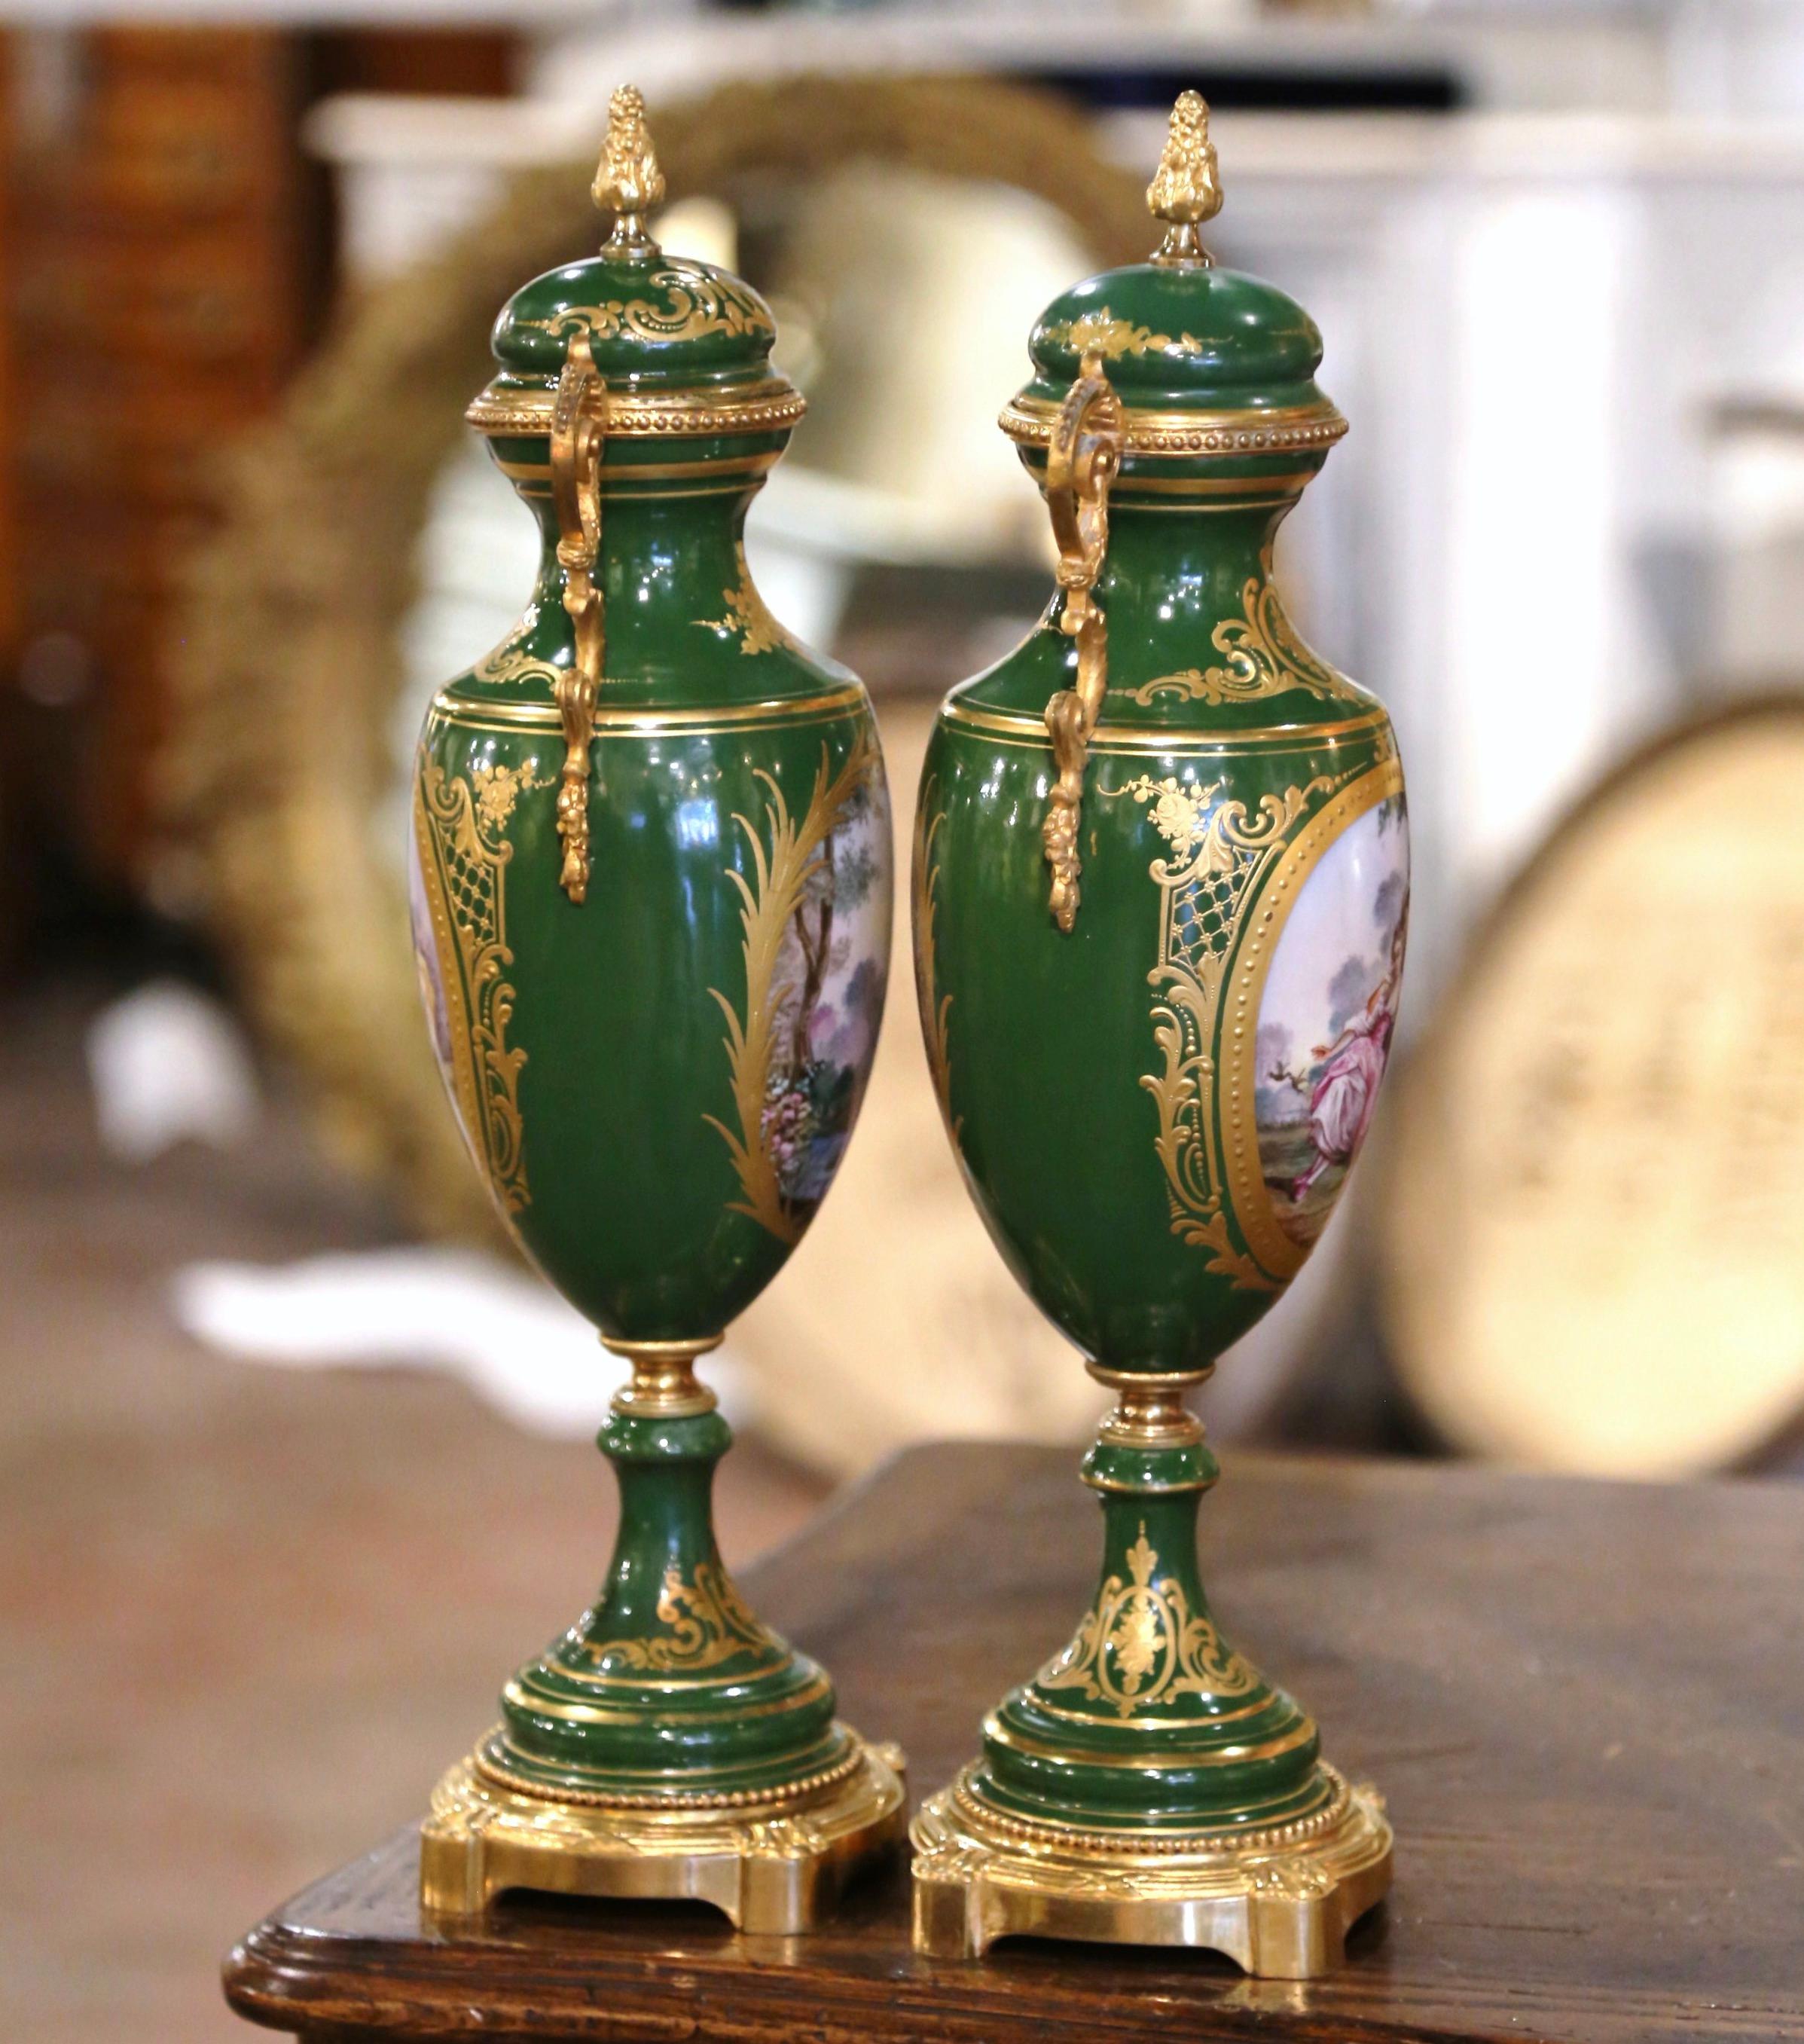 Pair of 19th Century French Sevres Gilt Metal and Painted Porcelain Covered Urns For Sale 7